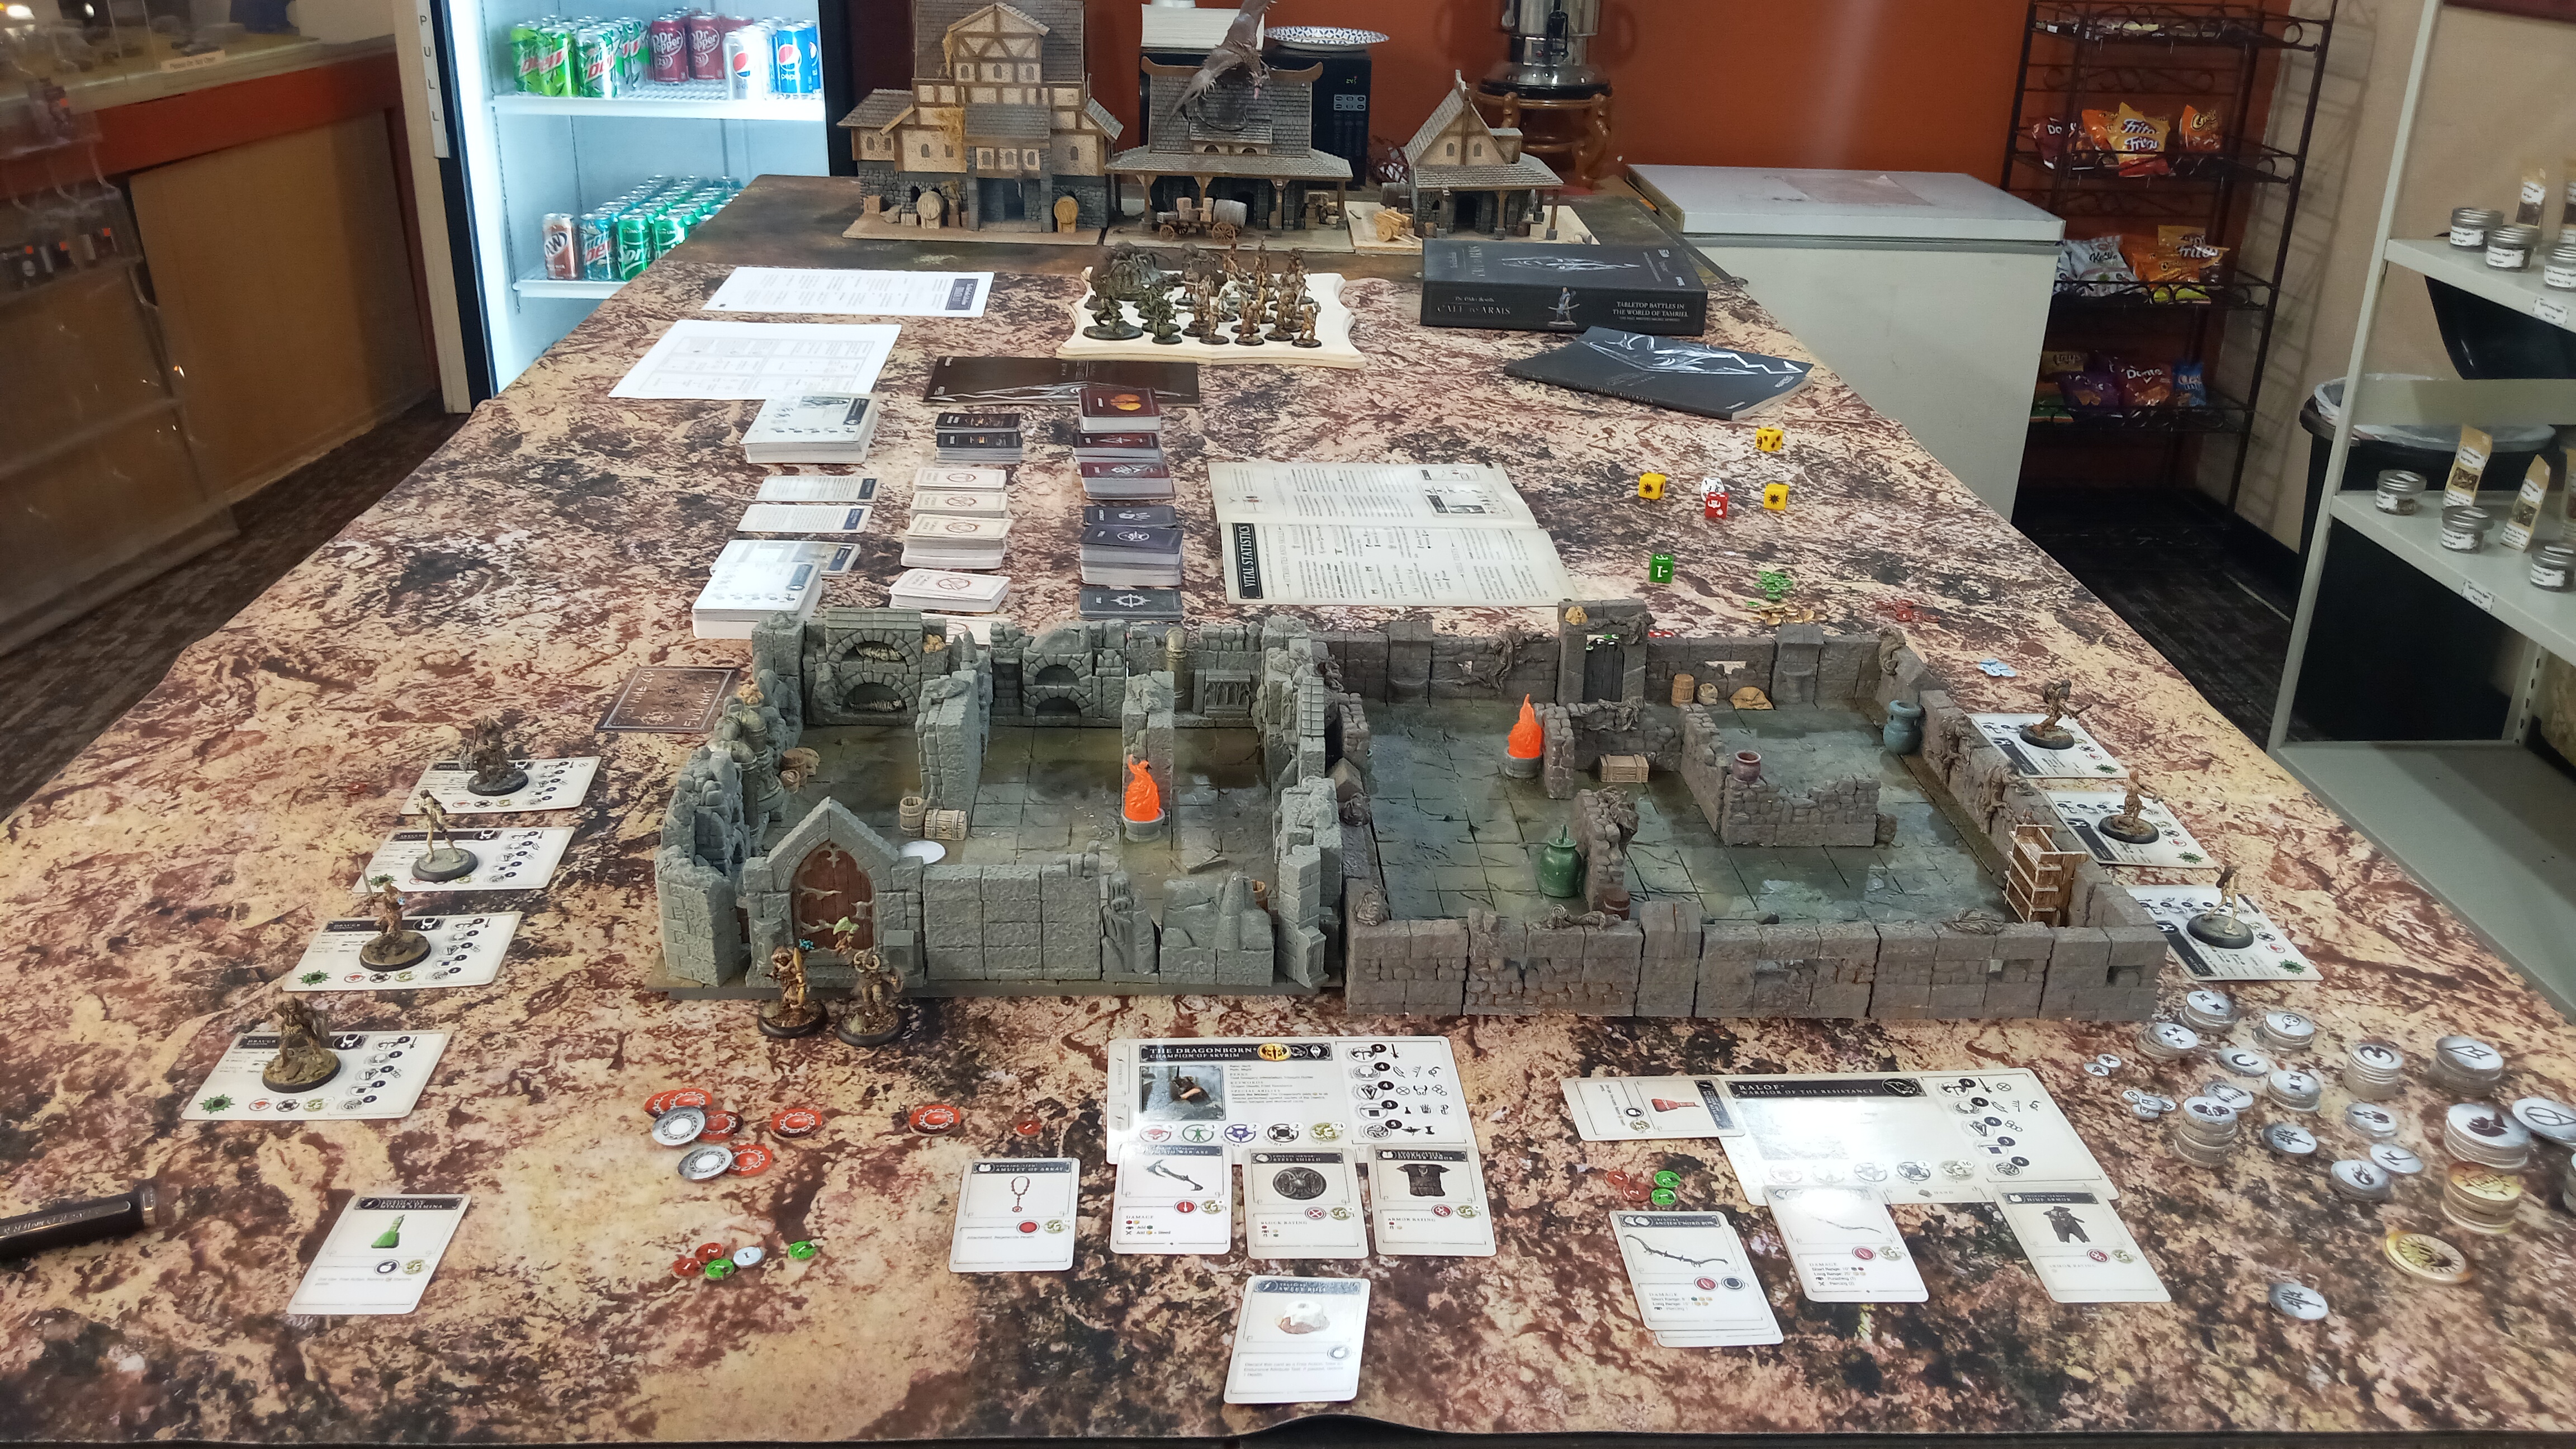 Silkweaver Caverns: A Scenario for the Elder Scrolls: Call to Arms -  Tabletop Gaming